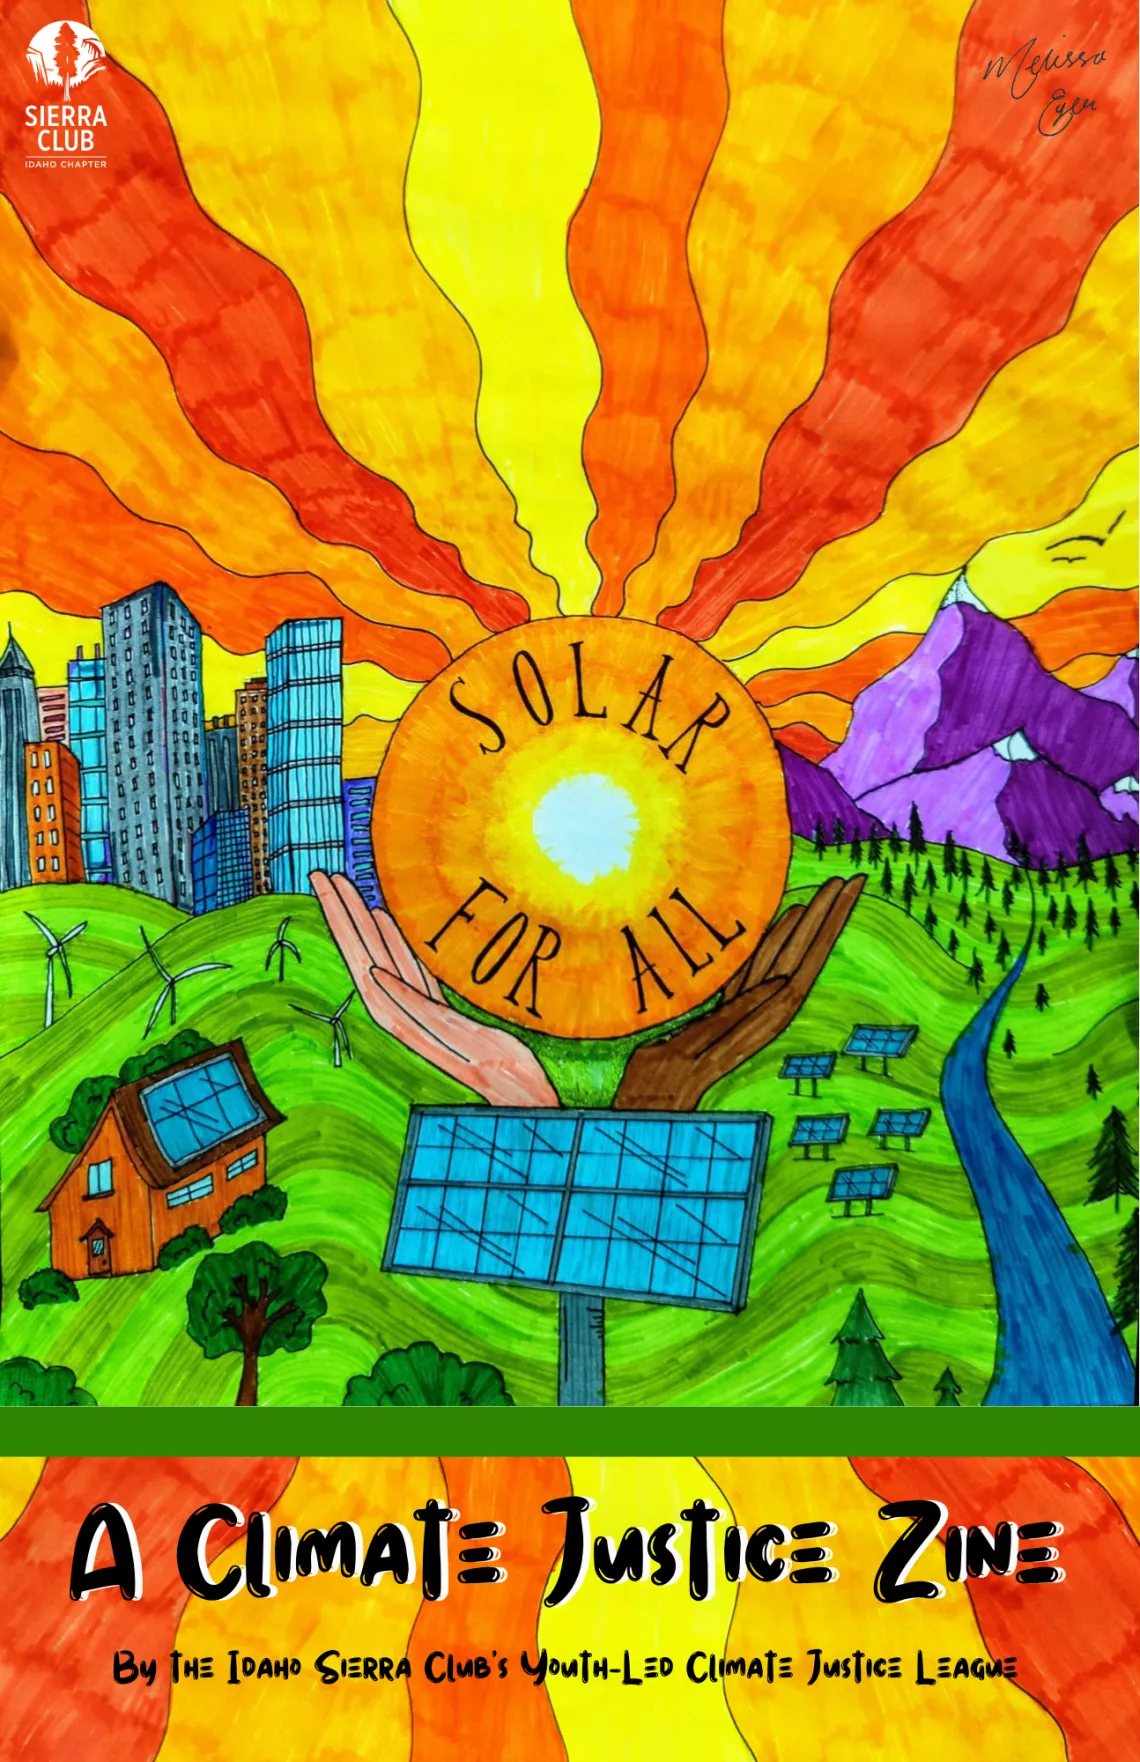 illustration of solar panel with sun held in two hands with rays emanating from the center of sun